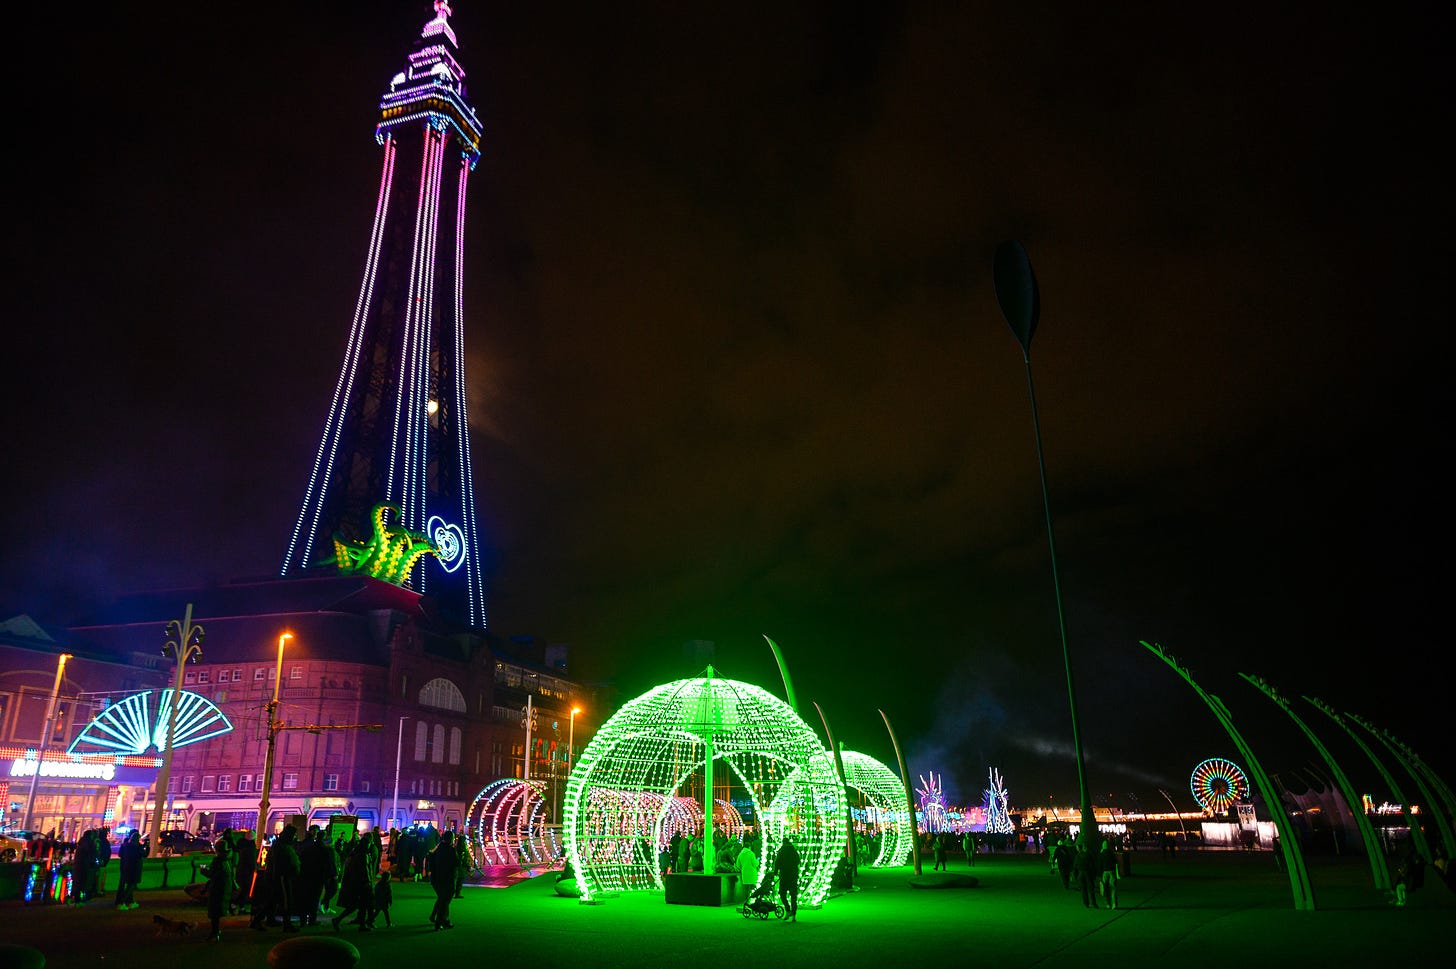 People walk through domes of green lights on the promenade in Blackpool. The tower is lit up.